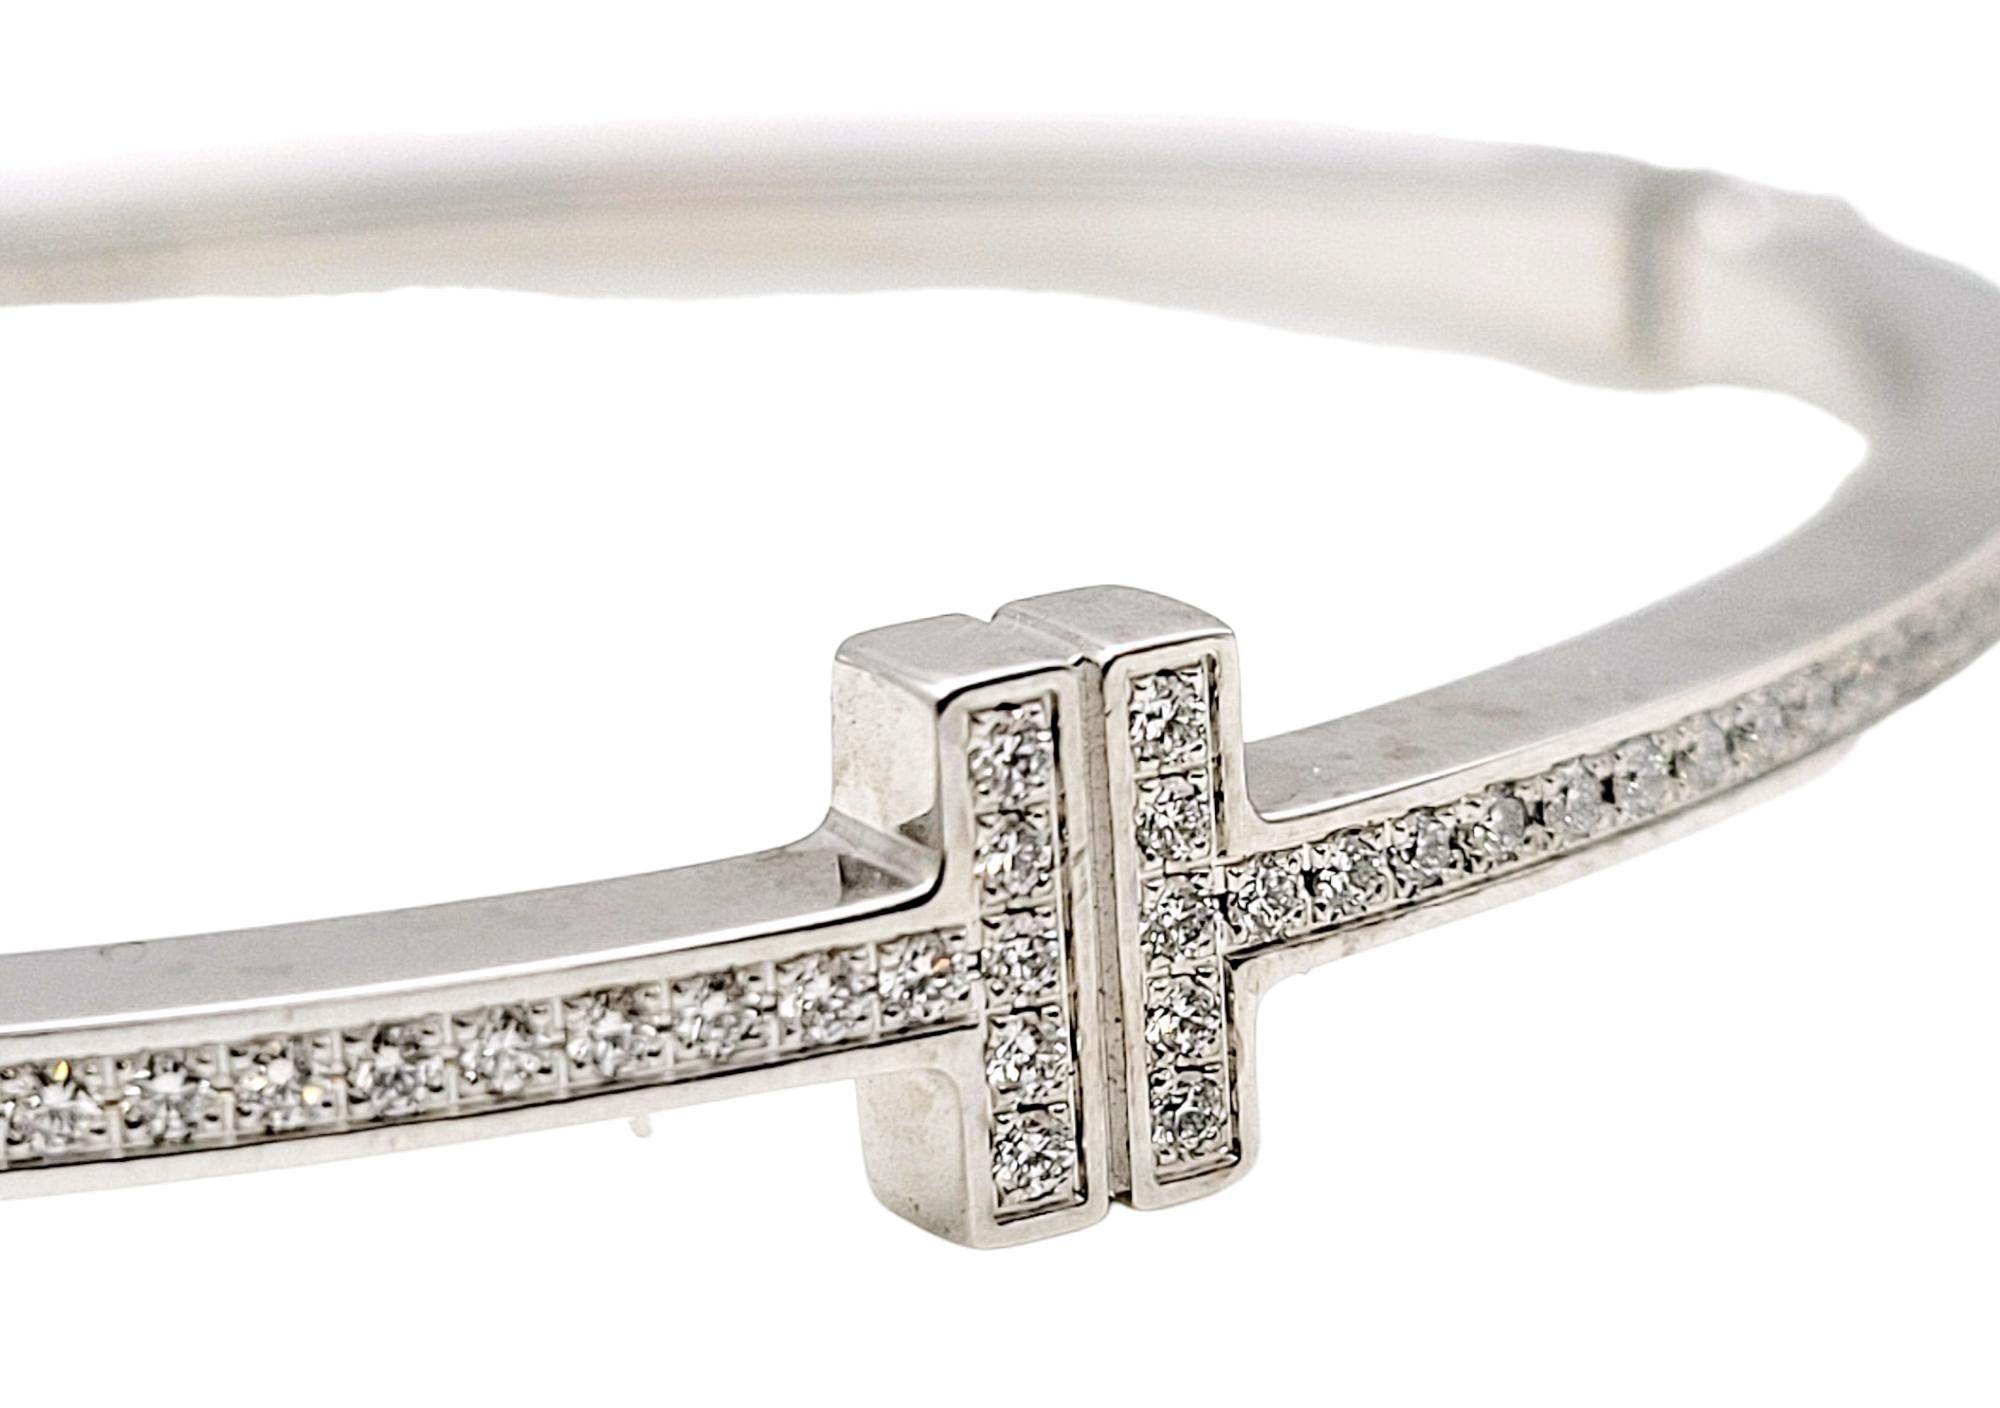 Tiffany & Co. Tiffany T Diamond Hinged Wire Bangle Bracelet in 18k White Gold In Good Condition For Sale In Scottsdale, AZ